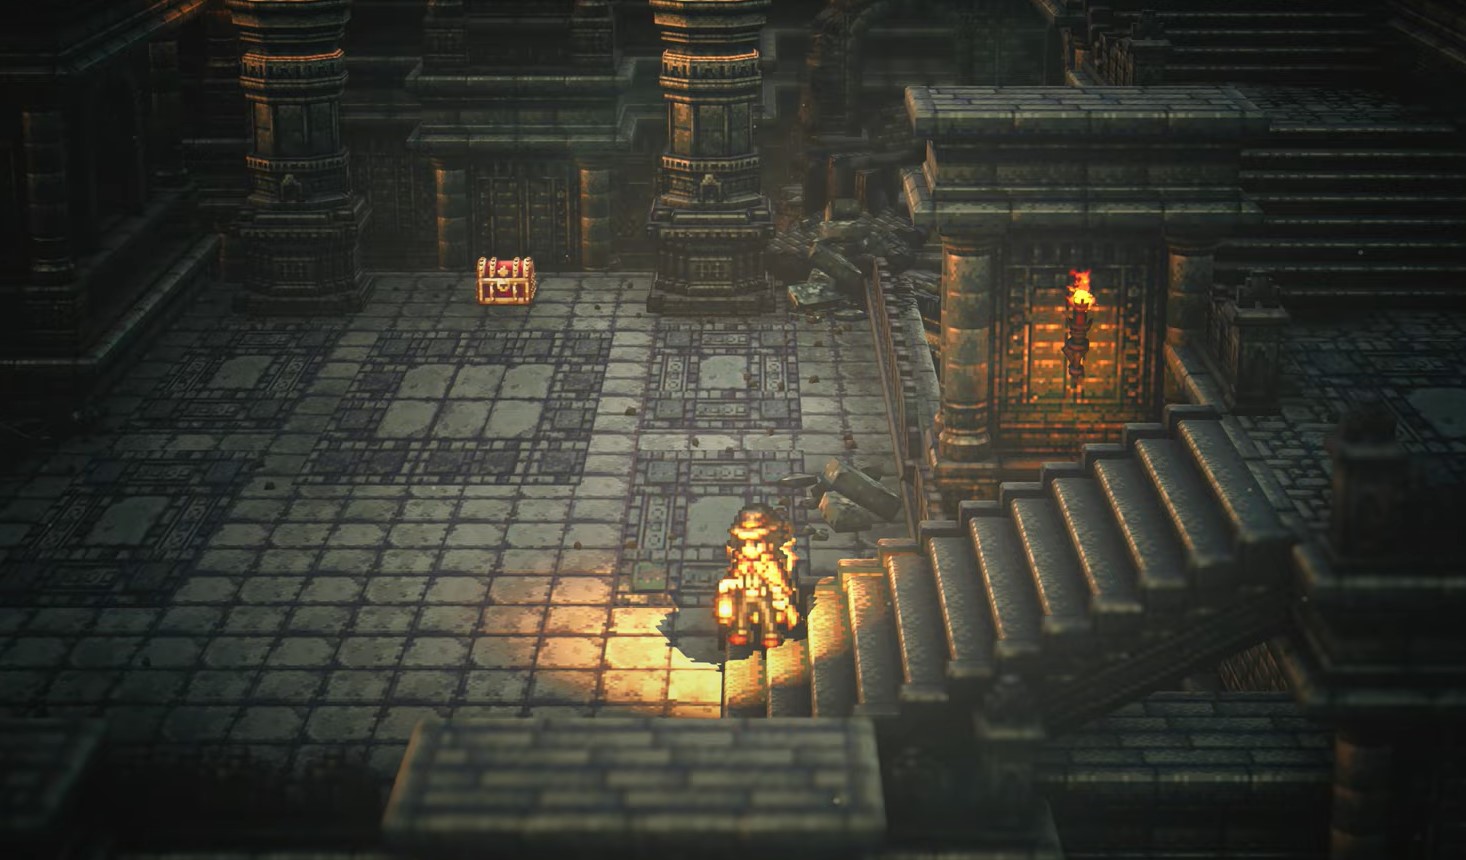 Stone of truth Octopath Traveler 2 - how to get it approaching the chest in the room